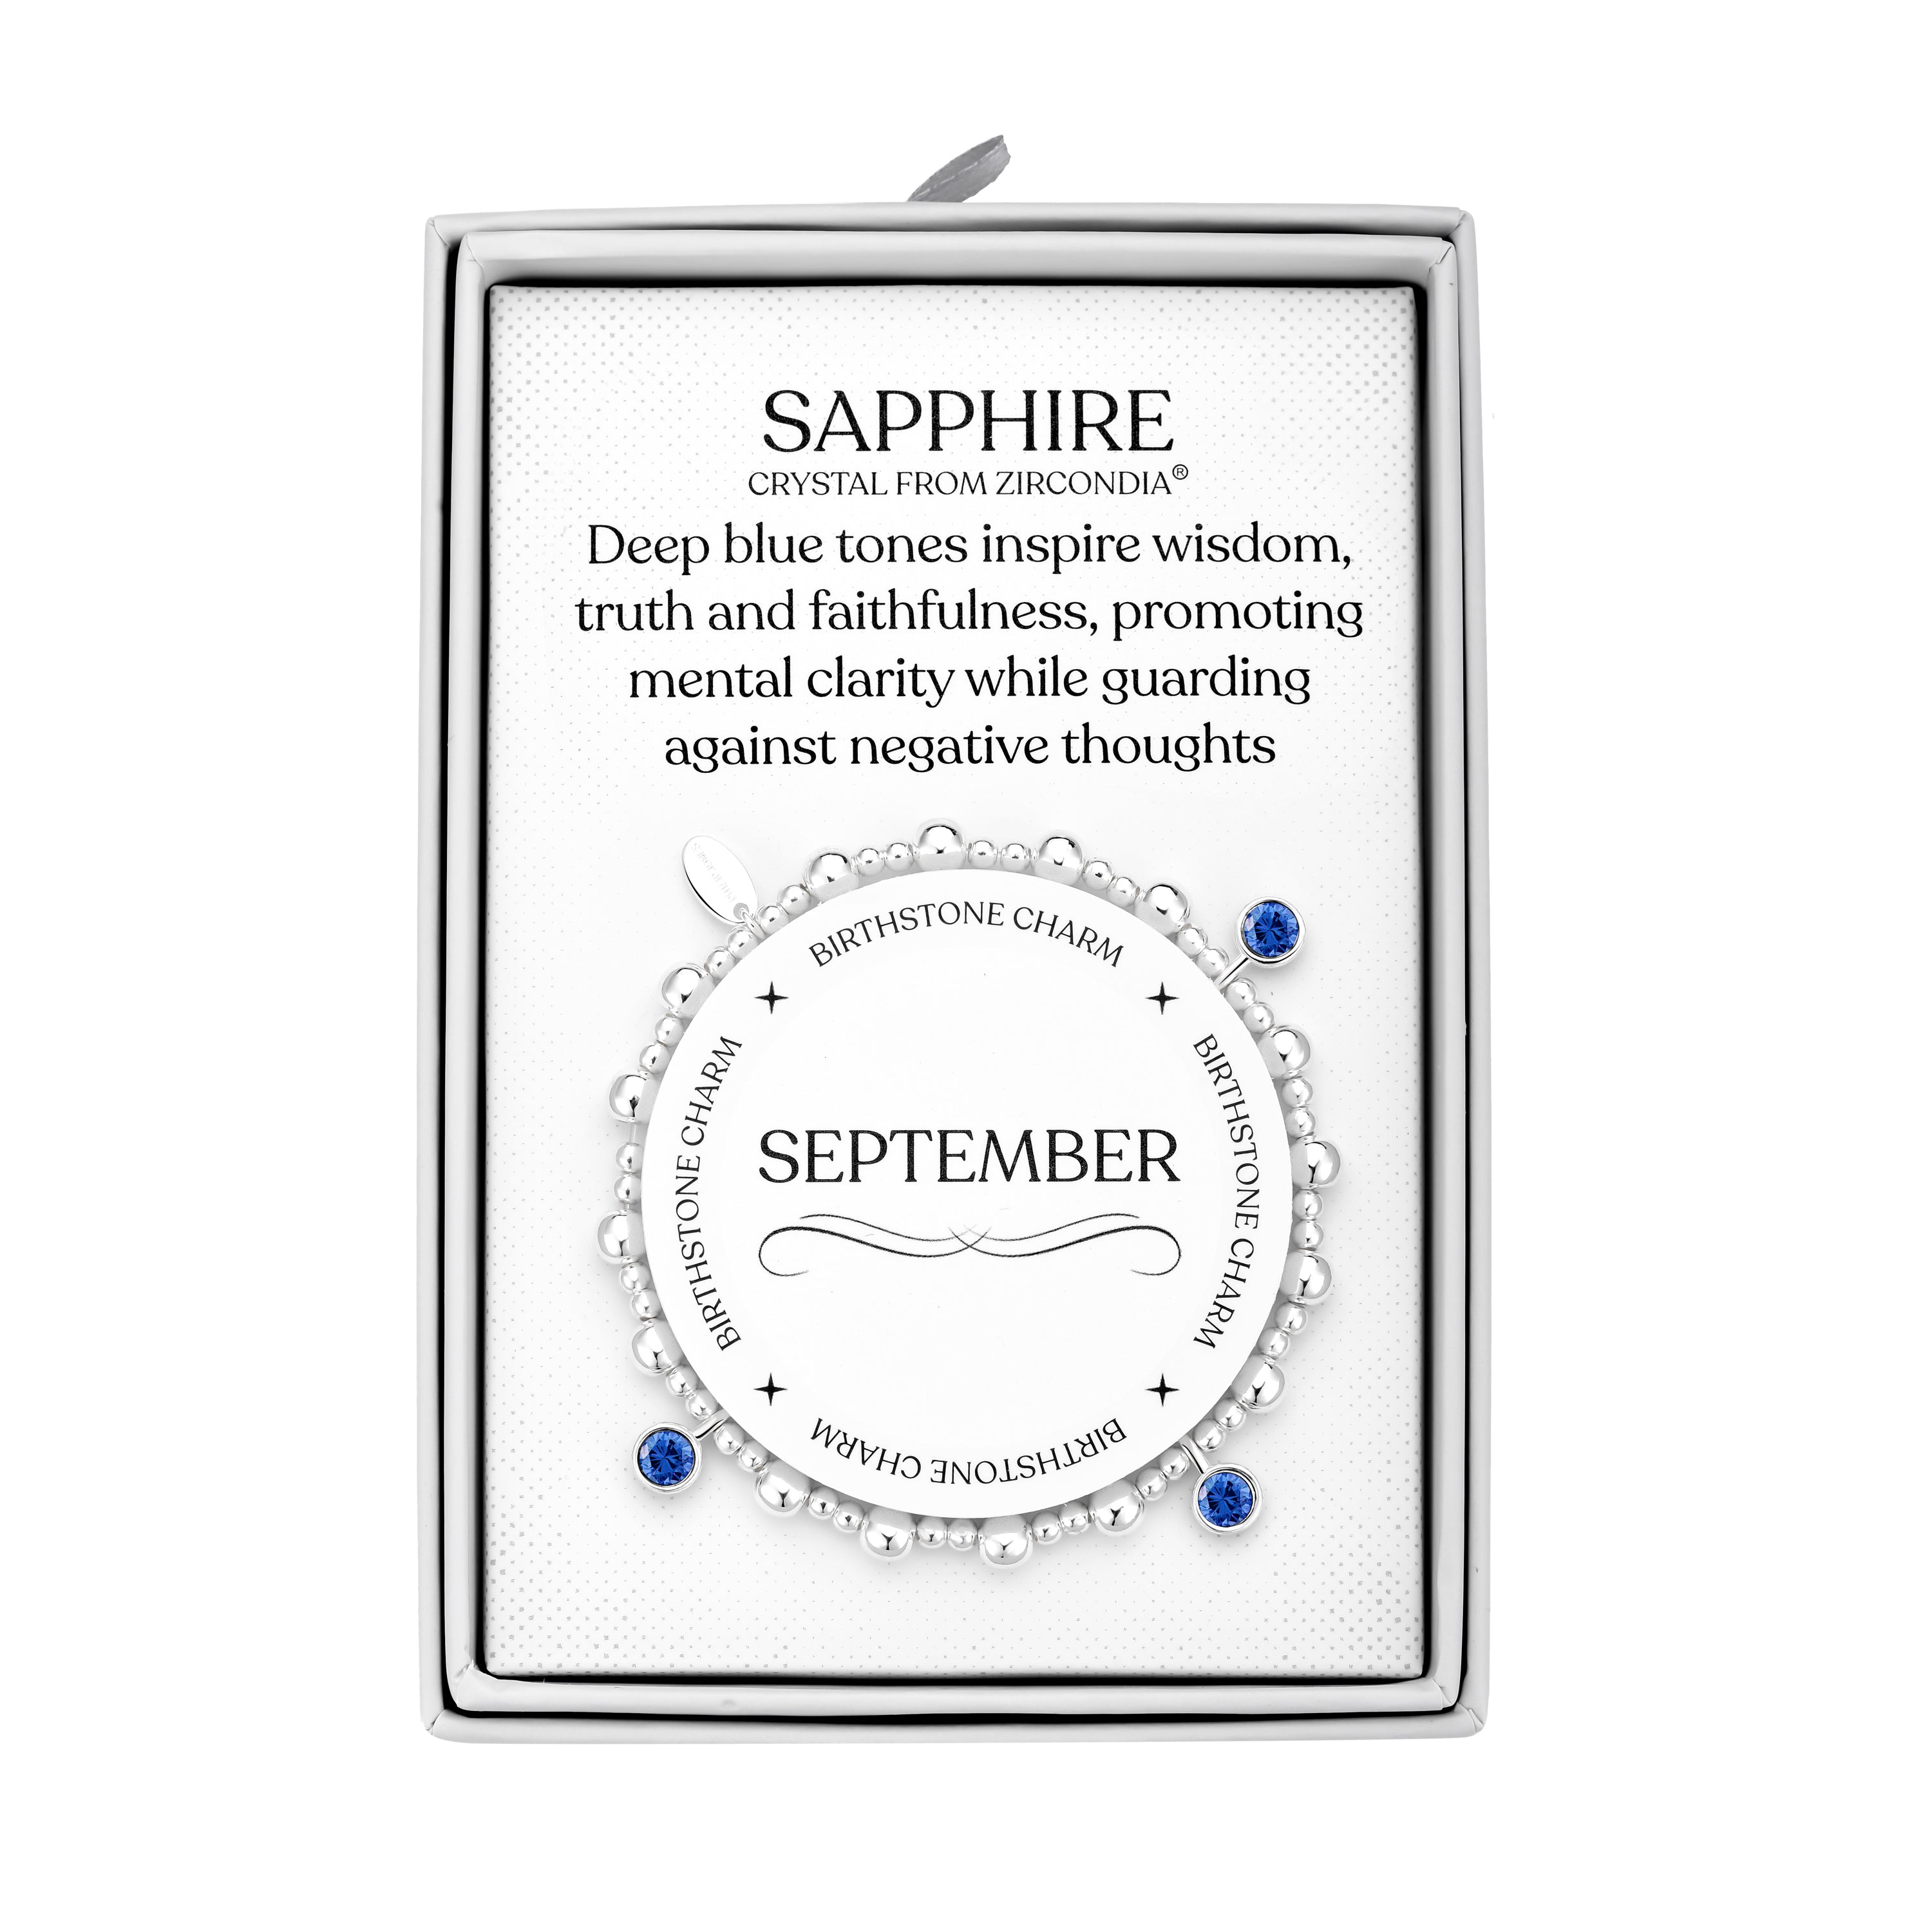 September (Sapphire) Birthstone Stretch Charm Bracelet with Quote Gift Box by Philip Jones Jewellery